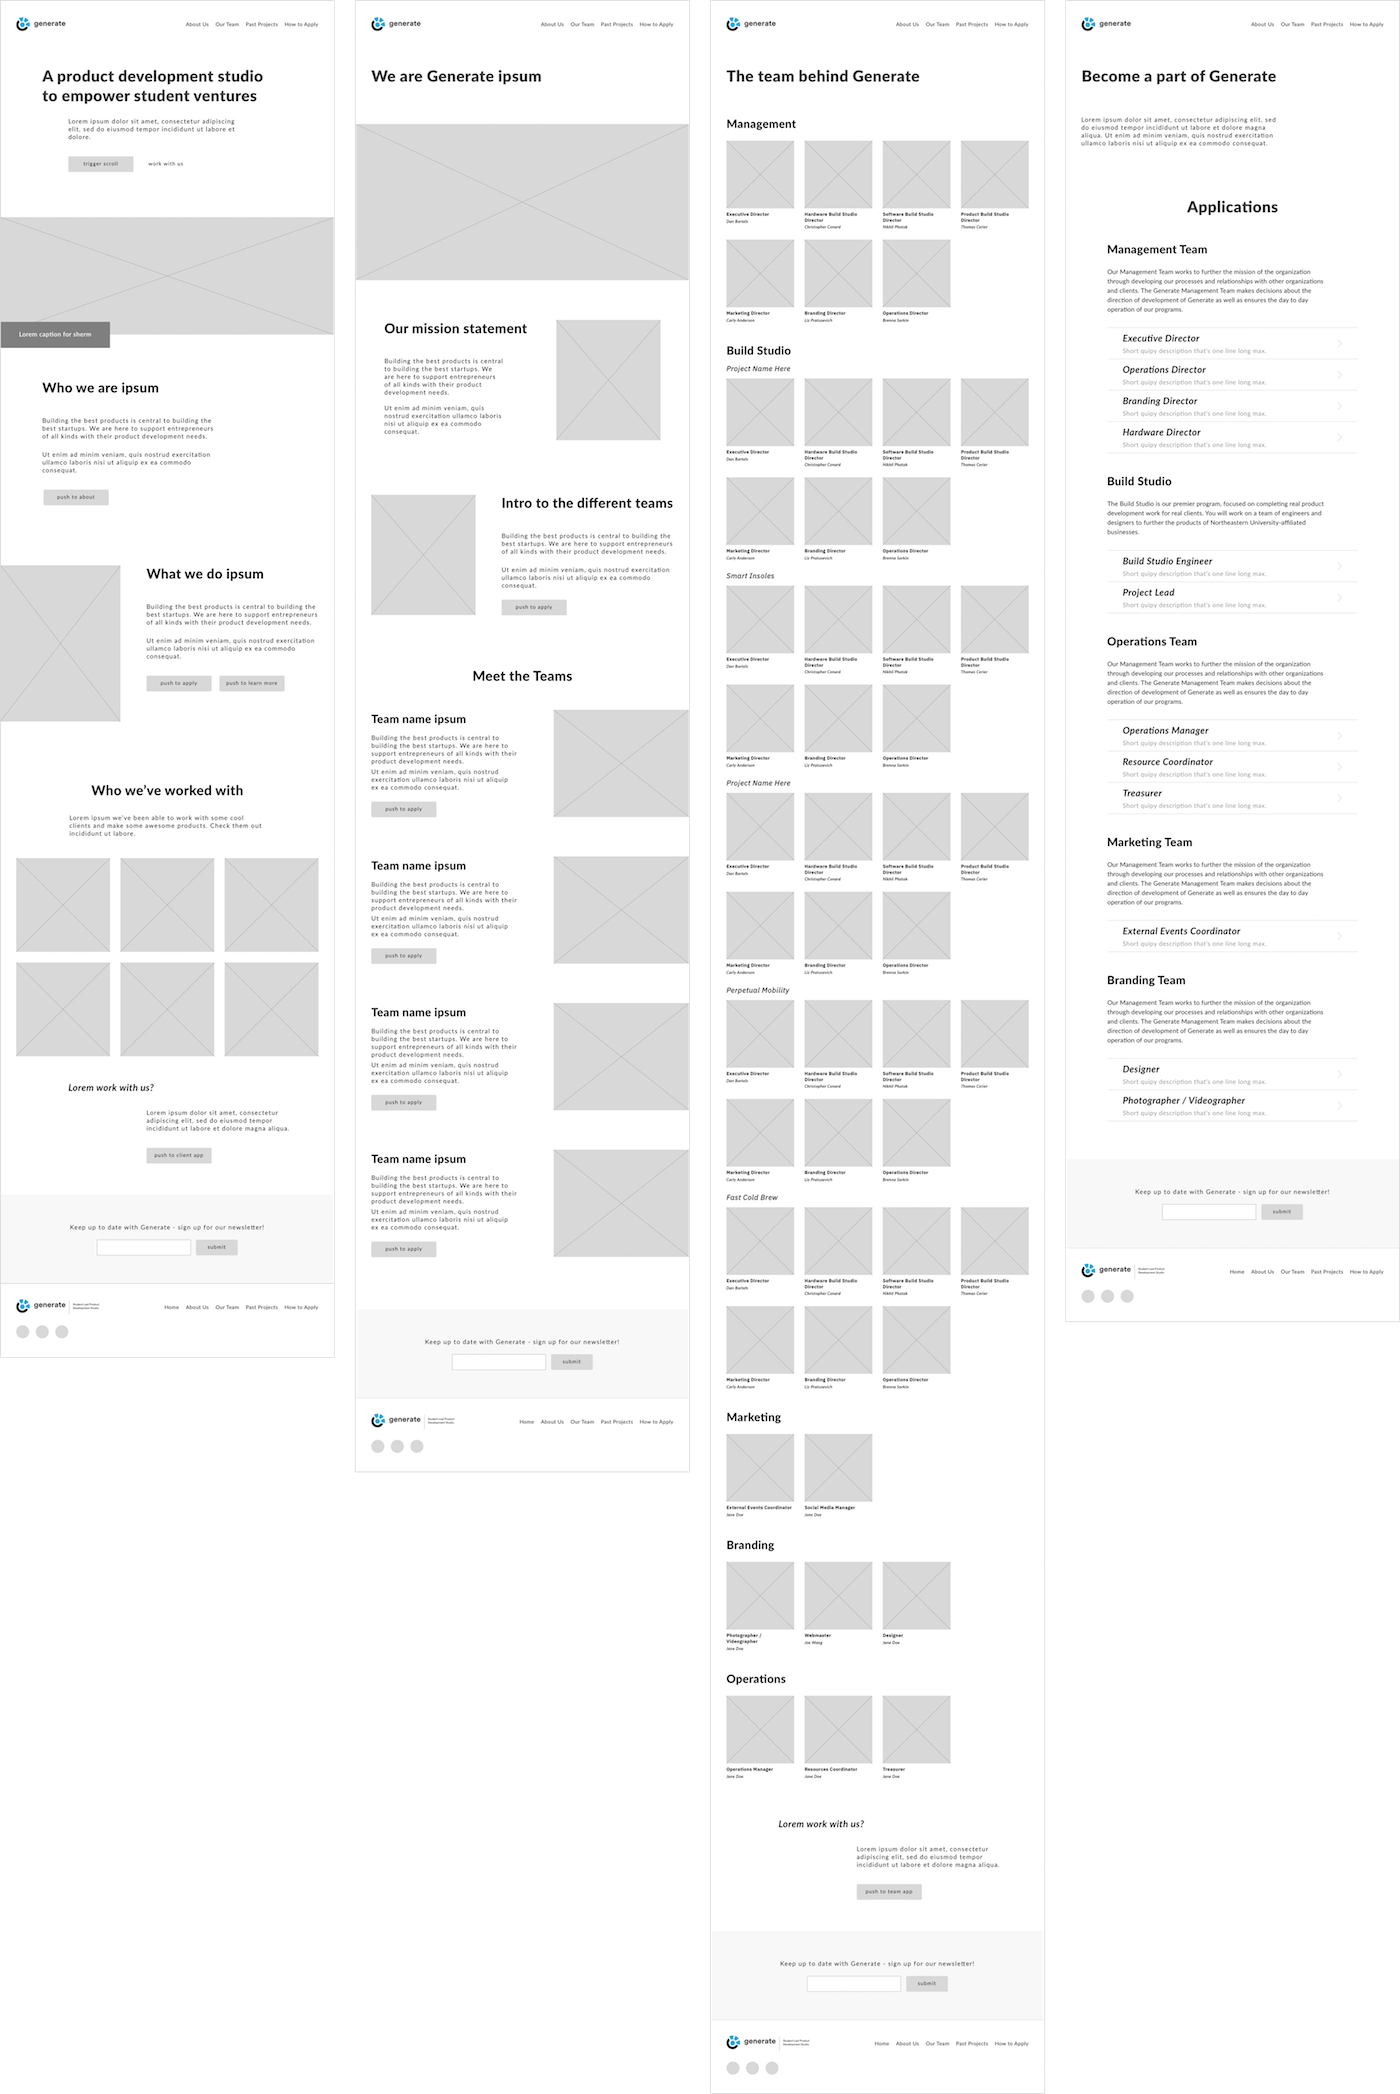 Wireframe mockups of the various screens on the Generate website.